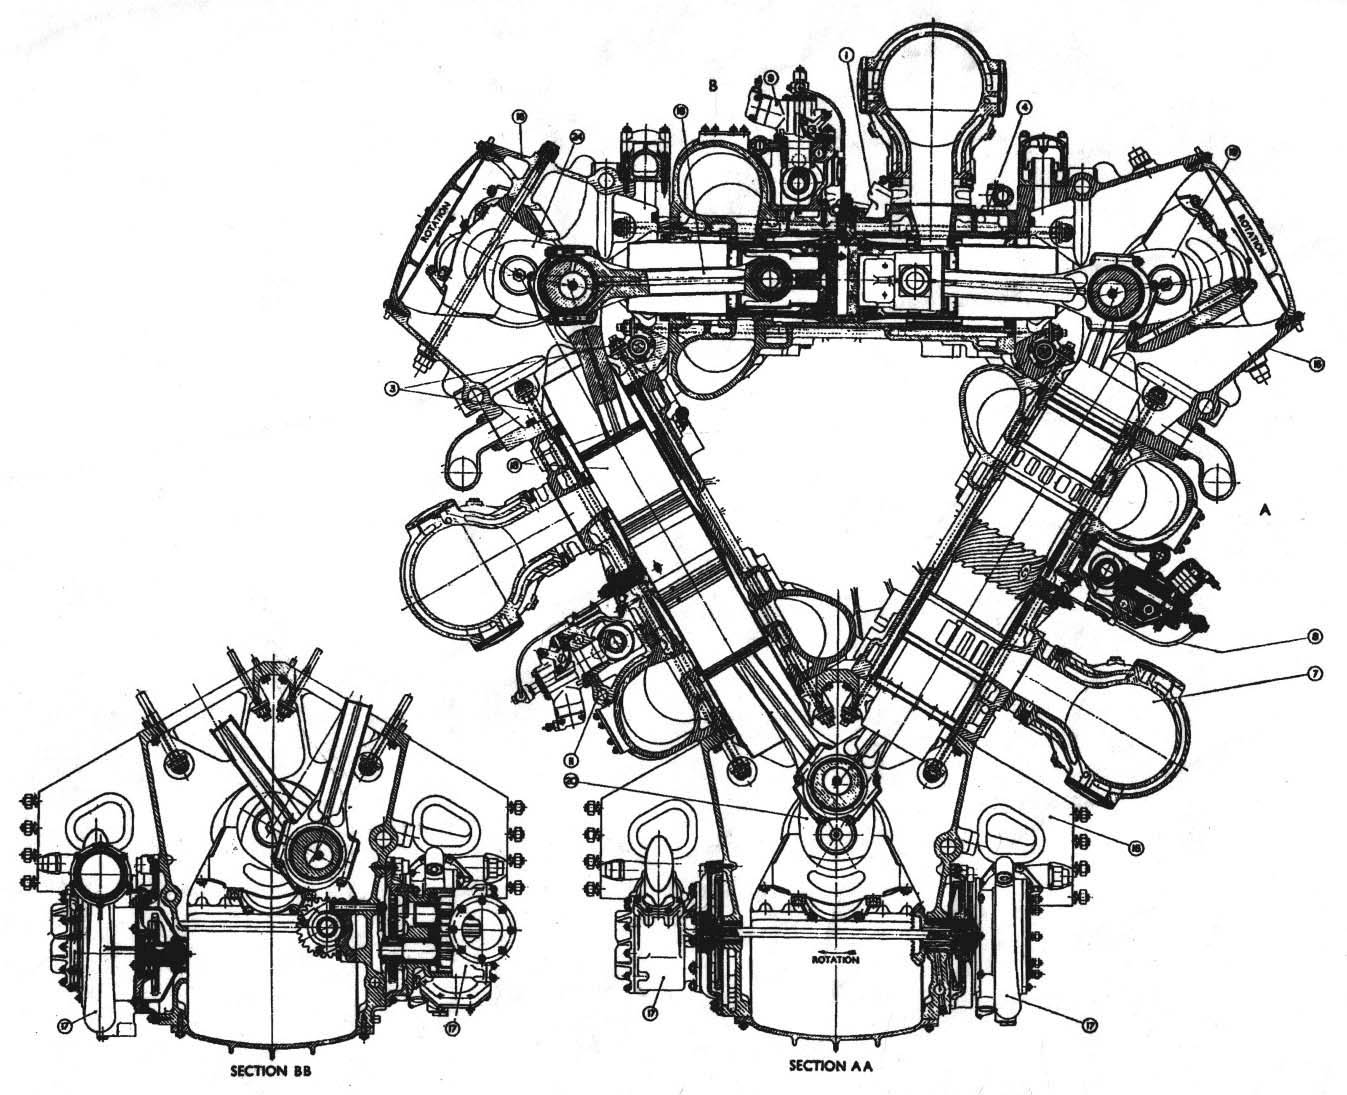 A detailed drawing of the Napier Deltic engine. 